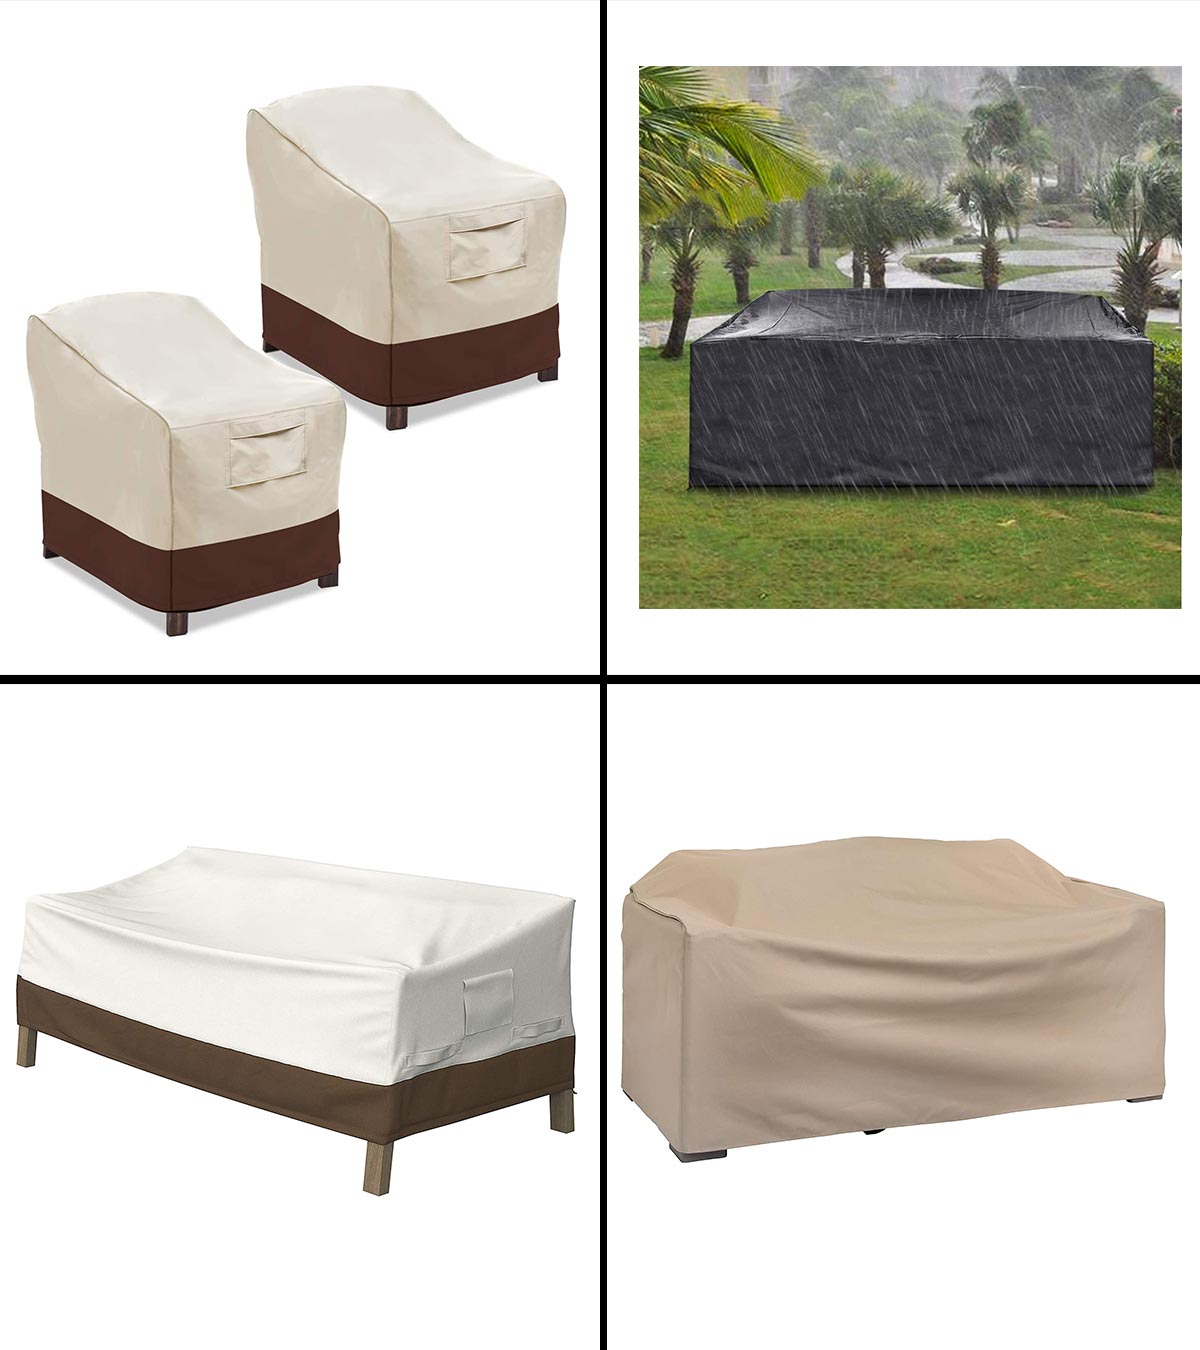 ZZXHOME Lounge Sofa Cover 81.28 Waterproof oxford cloth Garden Outdoor Sofa Cover Dustproof UV Protection Cover for Lounge Bench Love Seat 2 Seater/3 Seater,152.4 88.9 